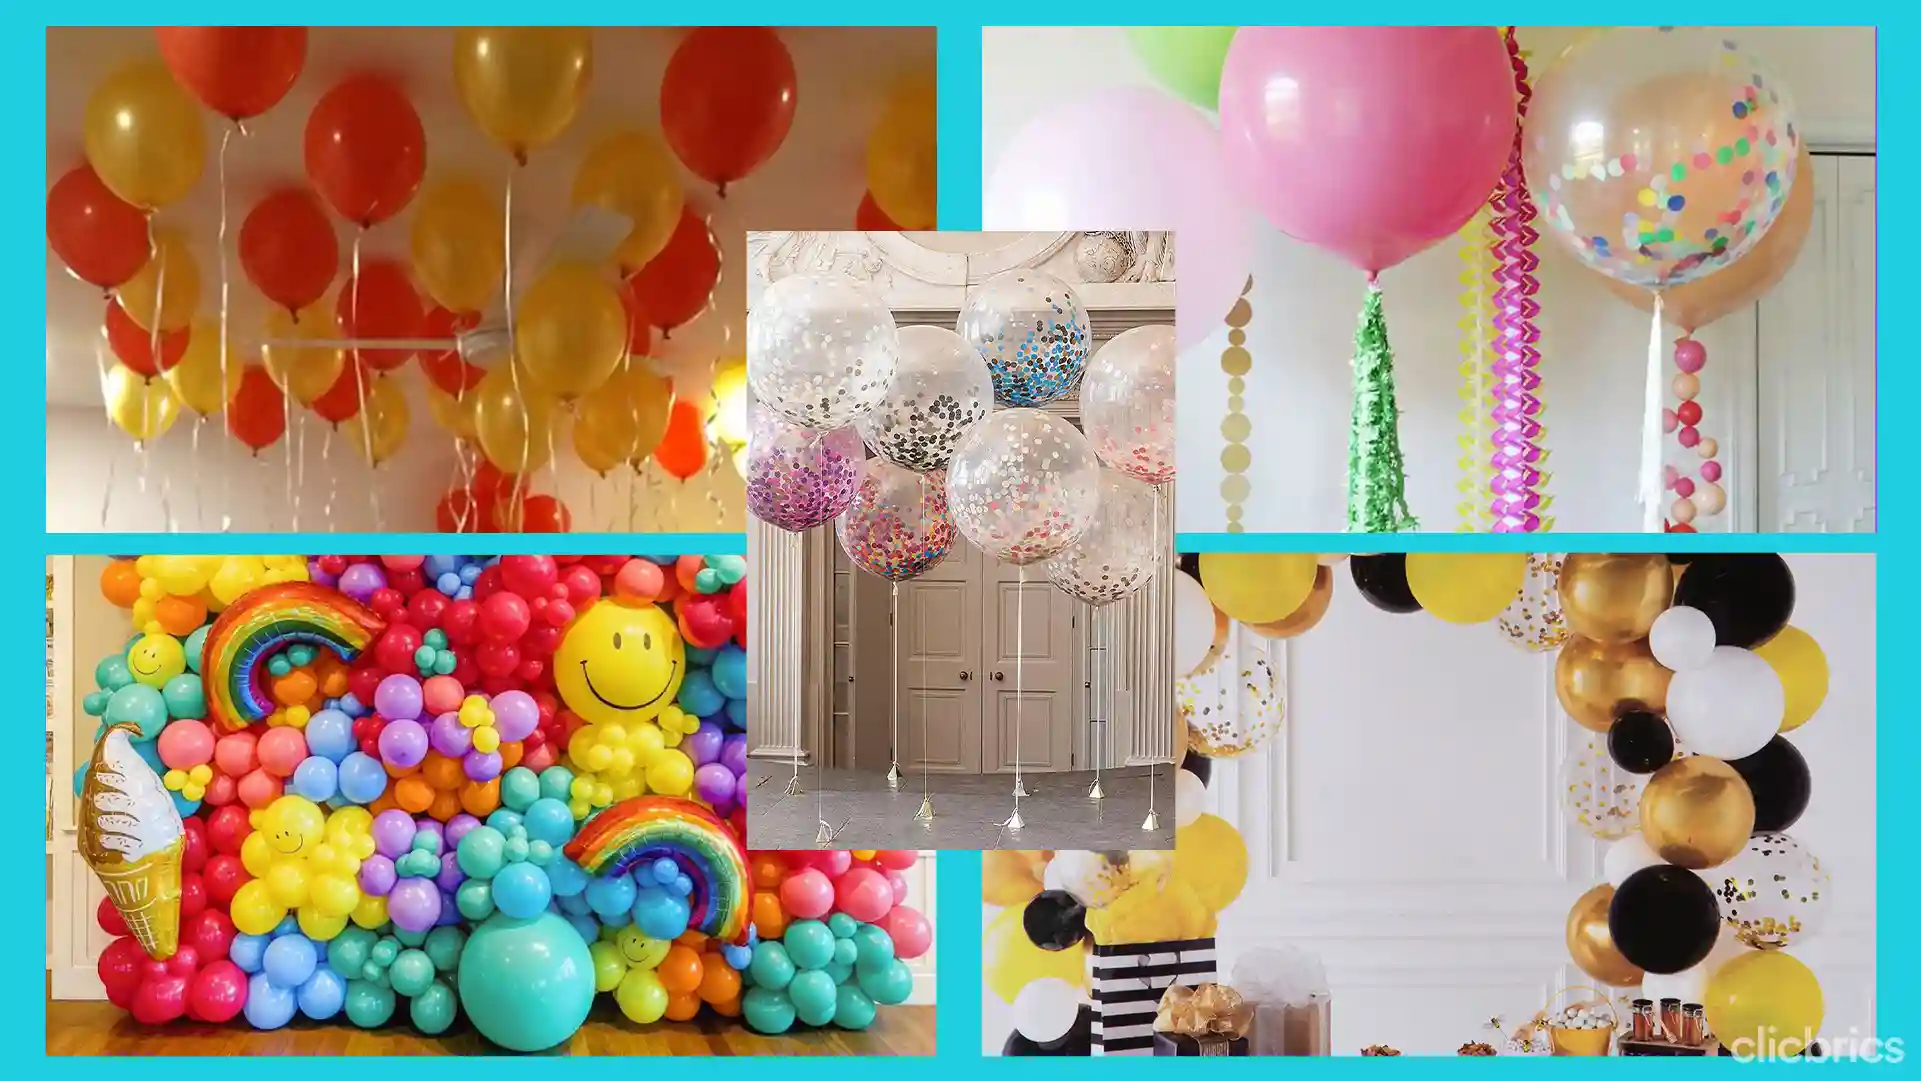 8 Birthday Decoration Ideas That Will Make Your Party - Just WOW!